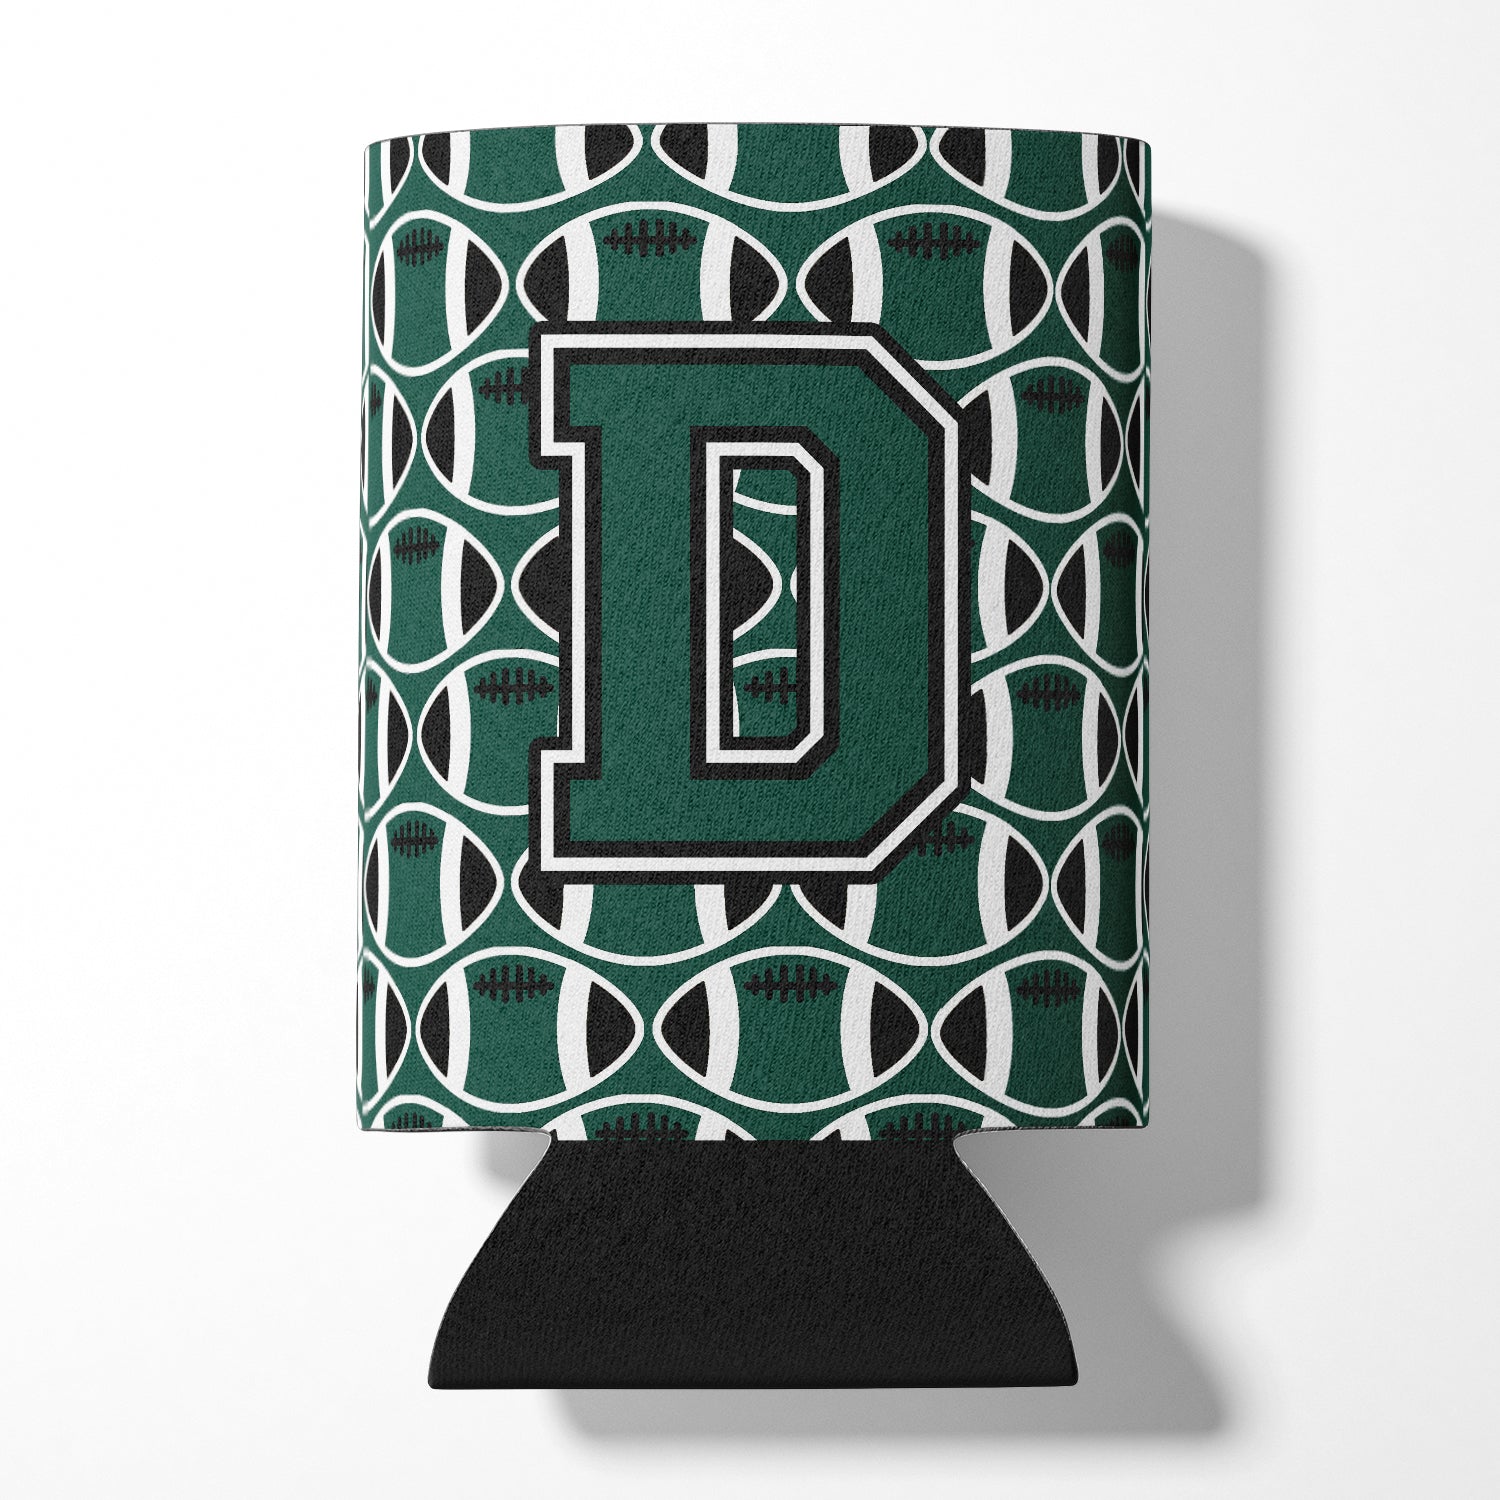 Letter D Football Green and White Can or Bottle Hugger CJ1071-DCC